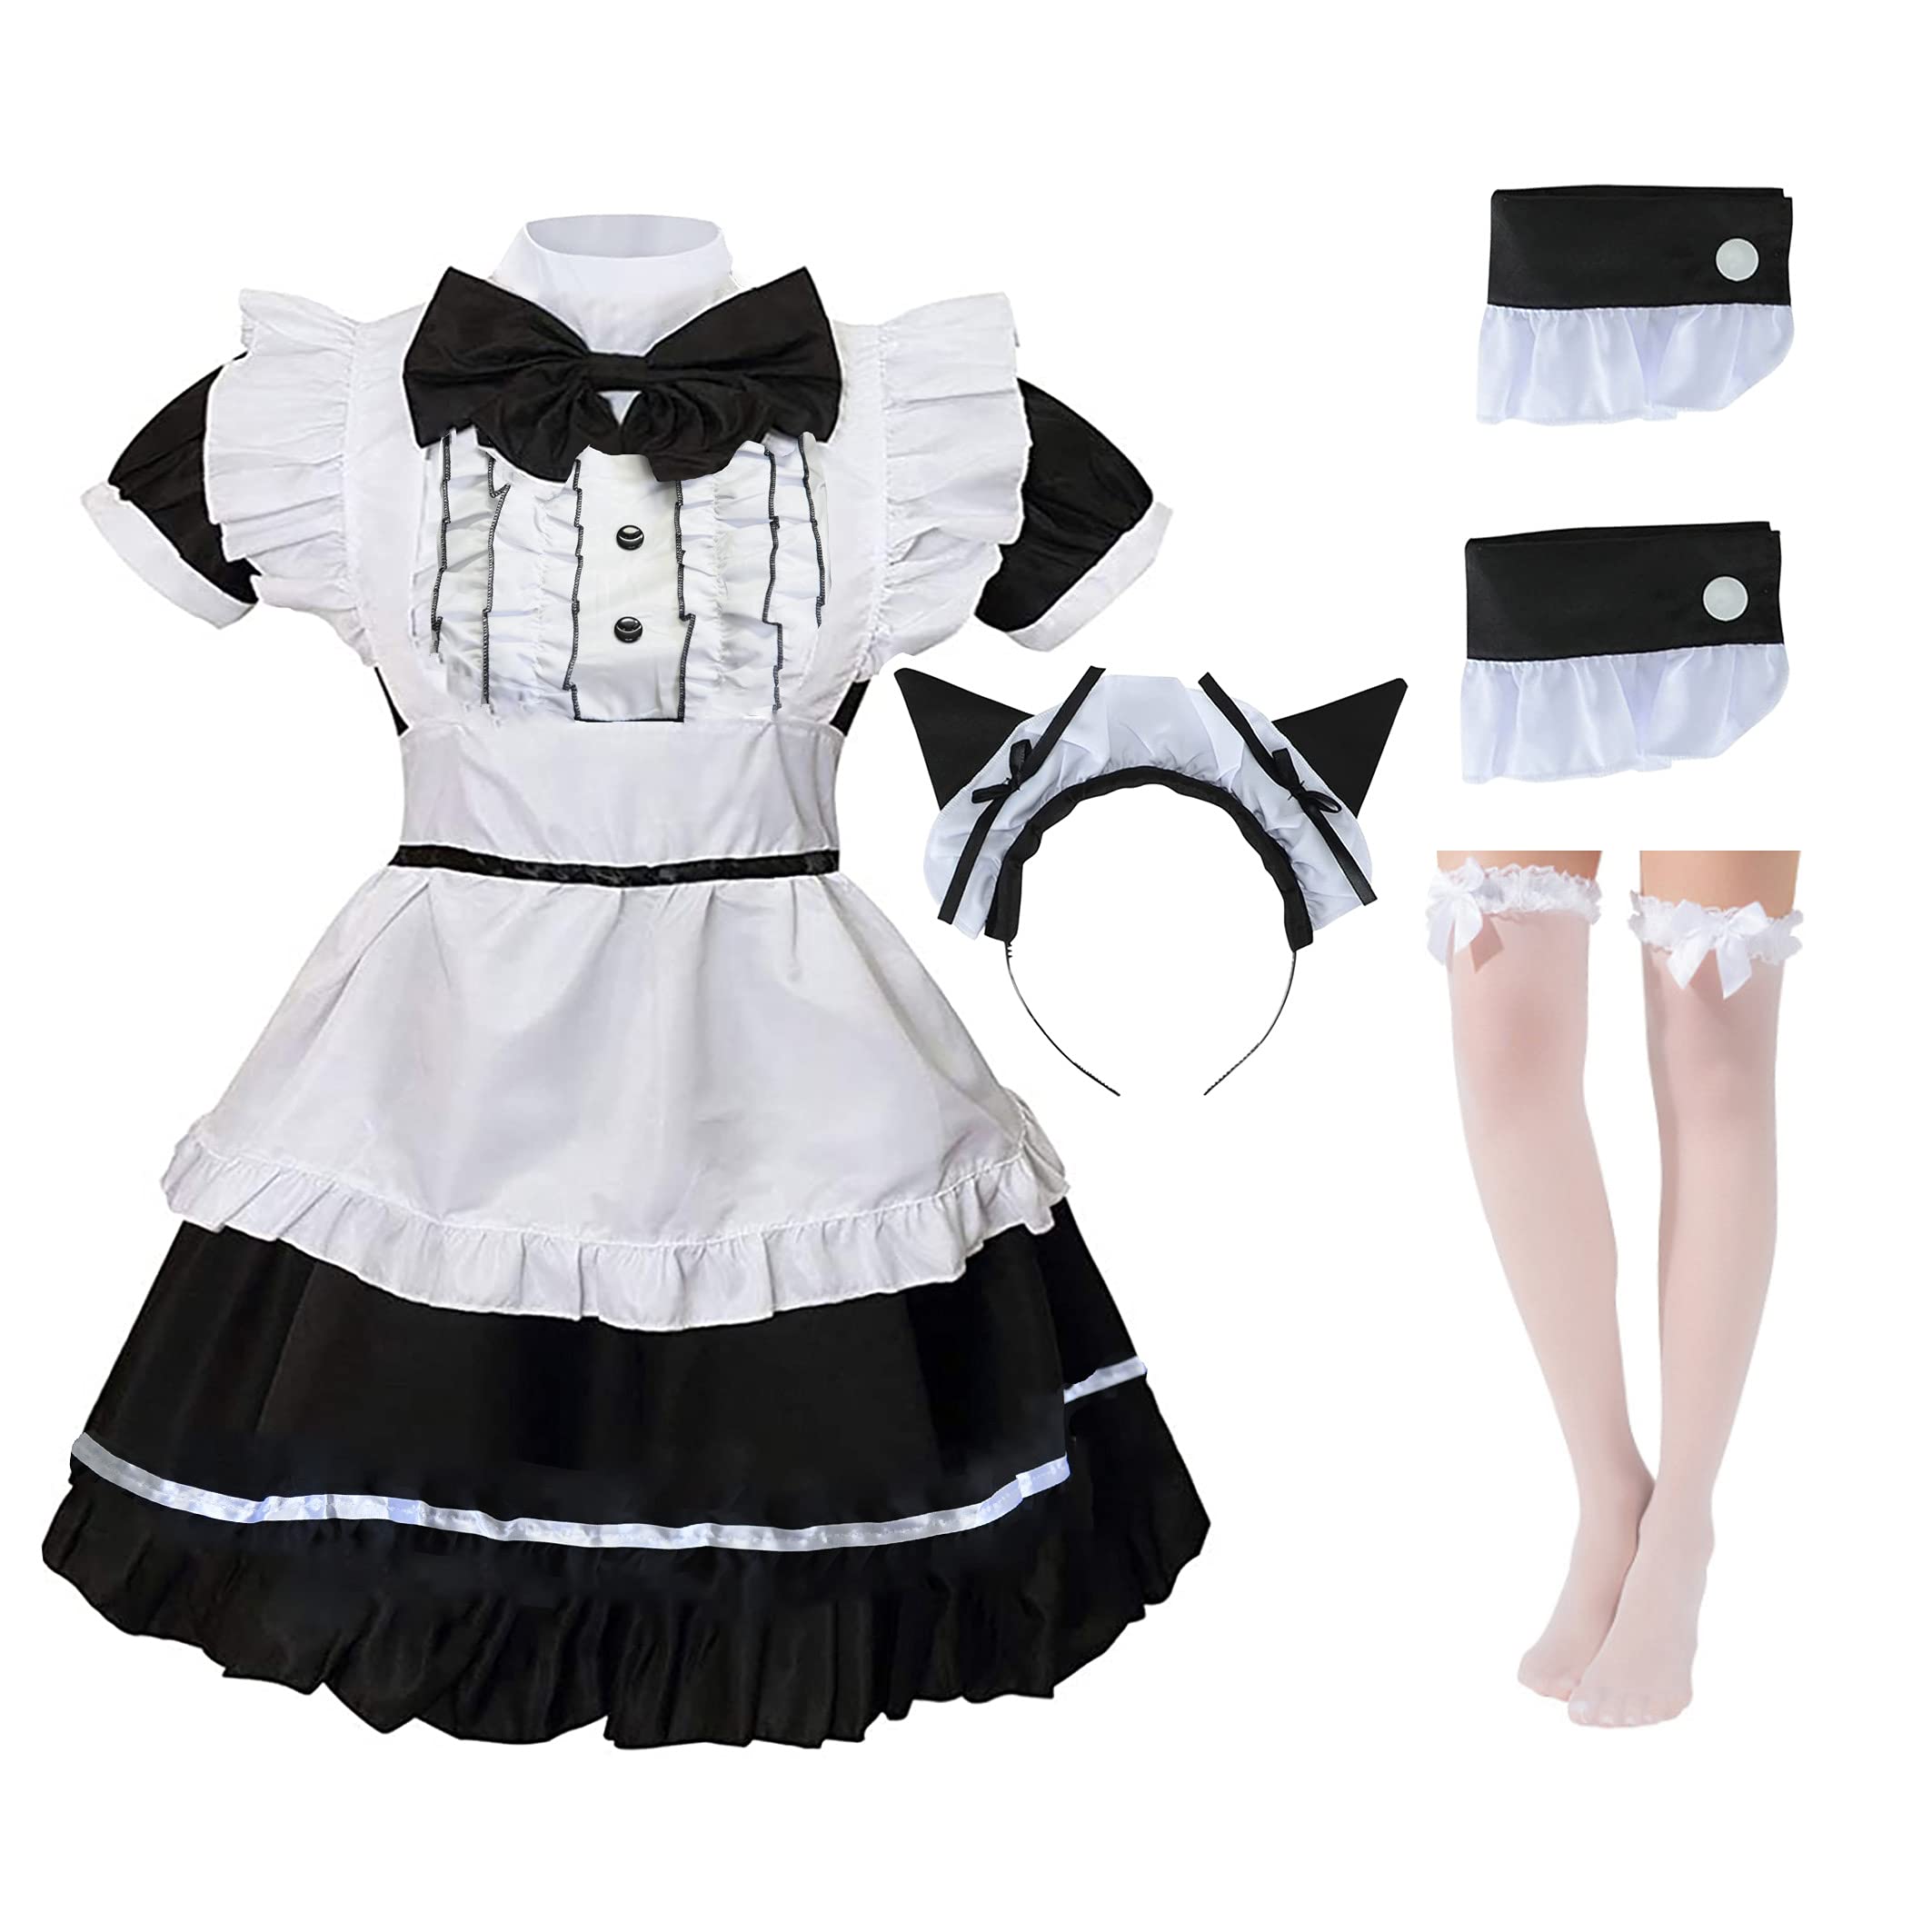 Arriba 97+ imagen cute maid outfit